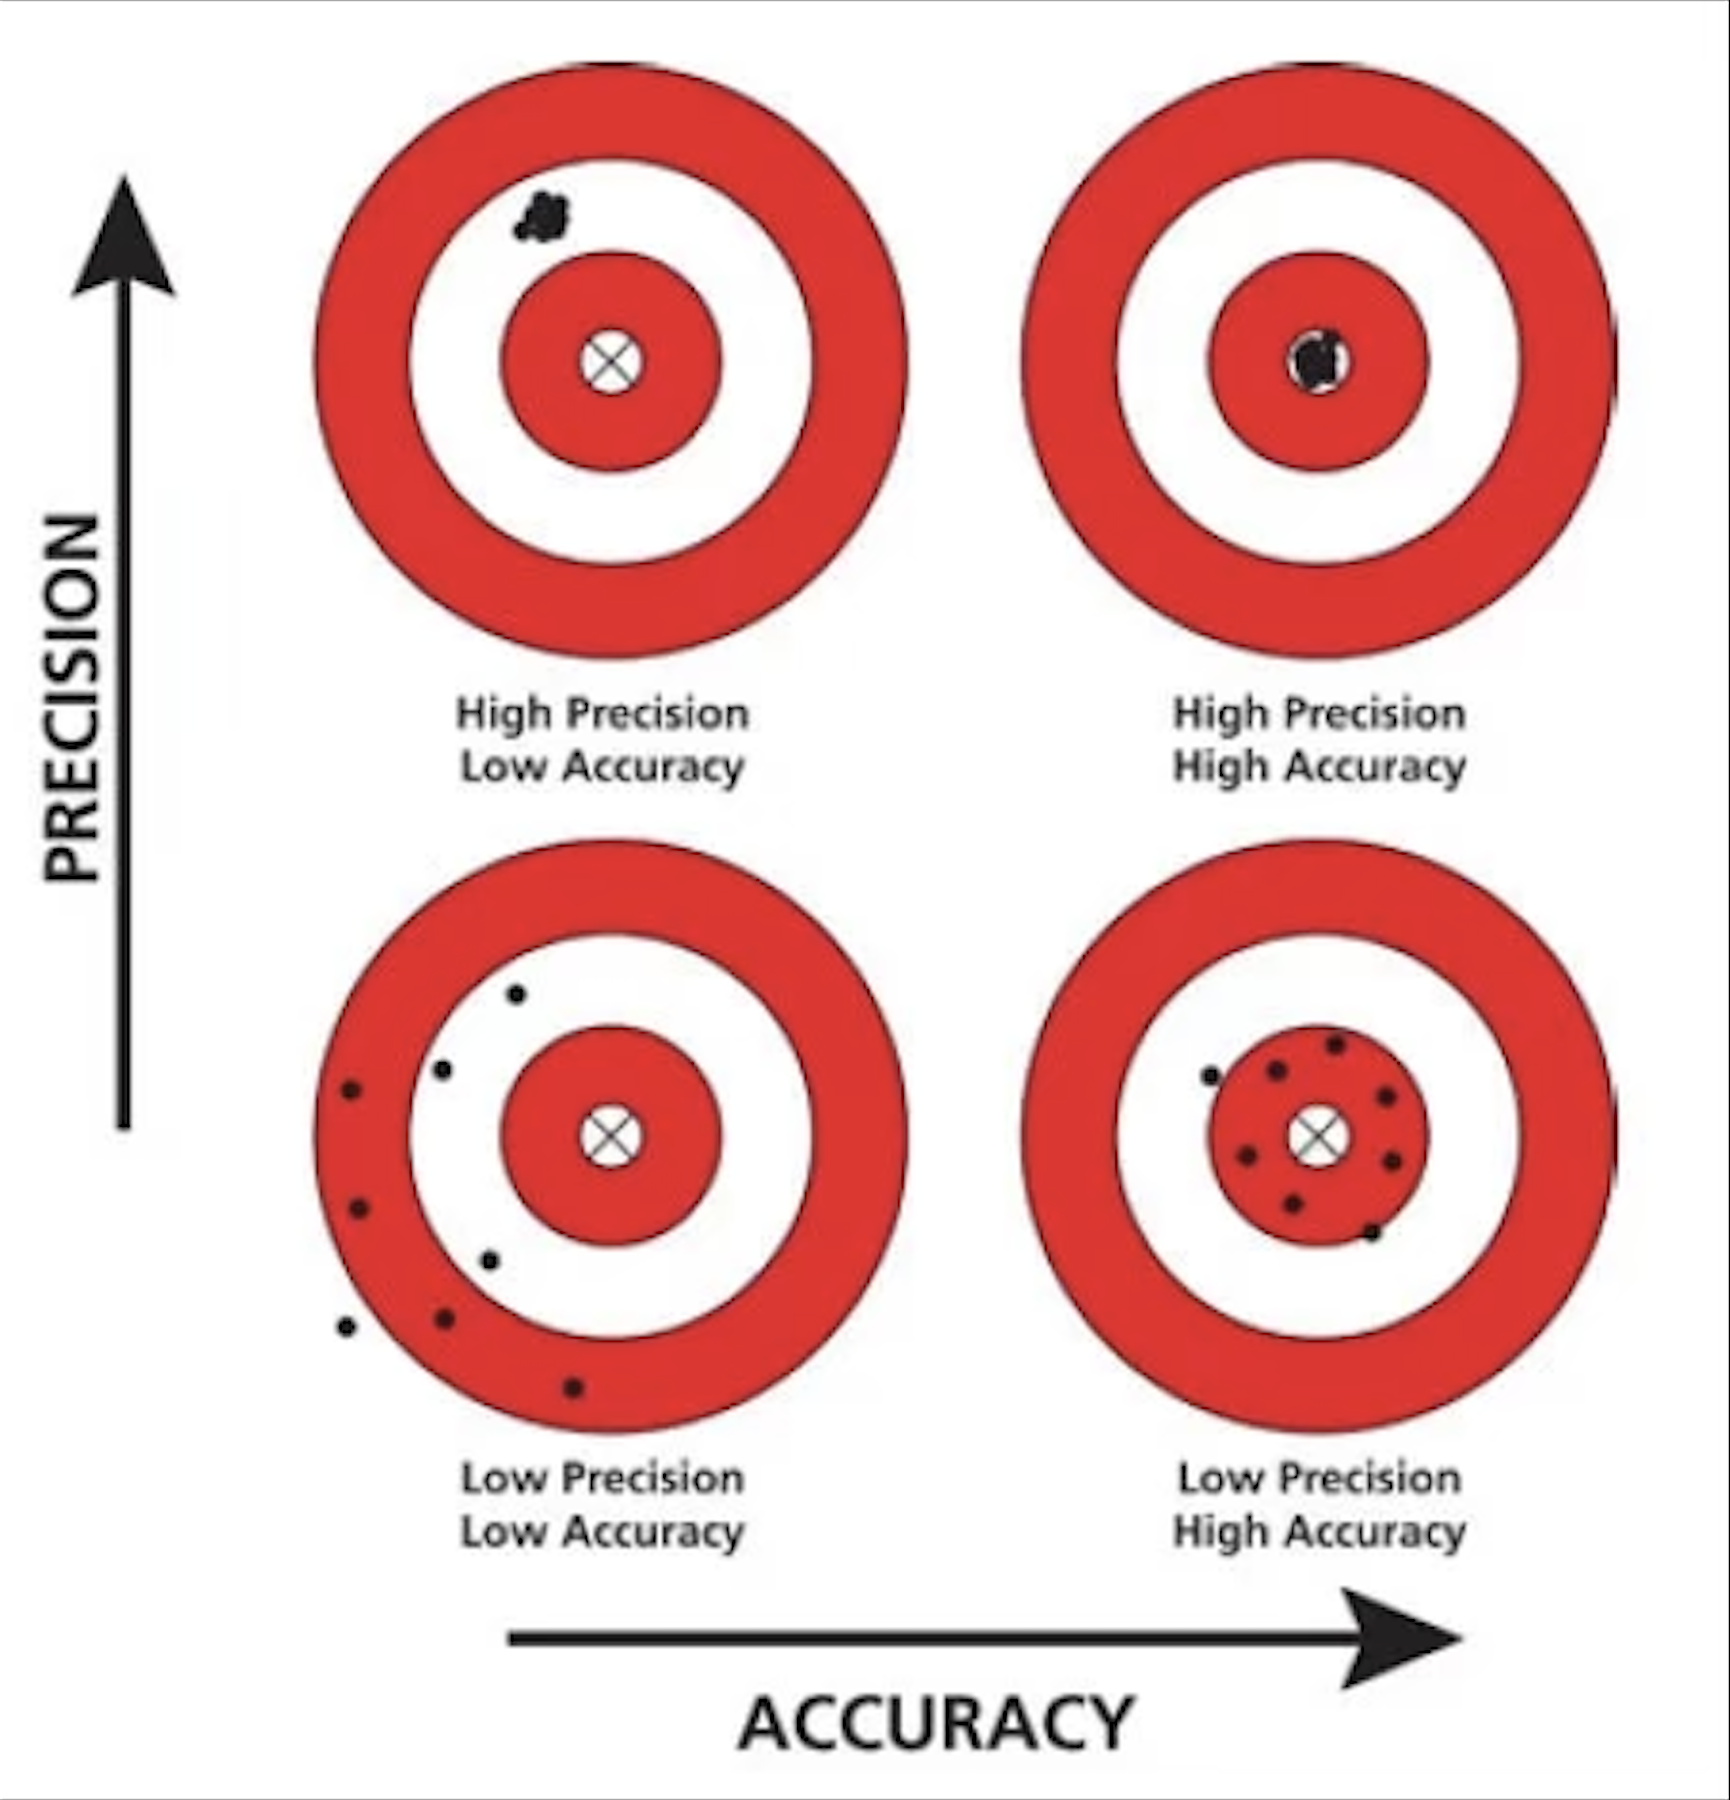 <p>Accuracy is the degree of closeness to the true value. Precision is the degree to which an instrument or process will repeat the same value.</p><p>Ex: If the 3 measurements were all around the same number then it is precise, but if they are all close to 1 g then the measurements are accurate. Yes, the measurements can be precise but not accurate: if the numbers were all close to 2 g, then it would be a precise measurement, but because they are not close to 1 g, the measurement is not accurate.</p>